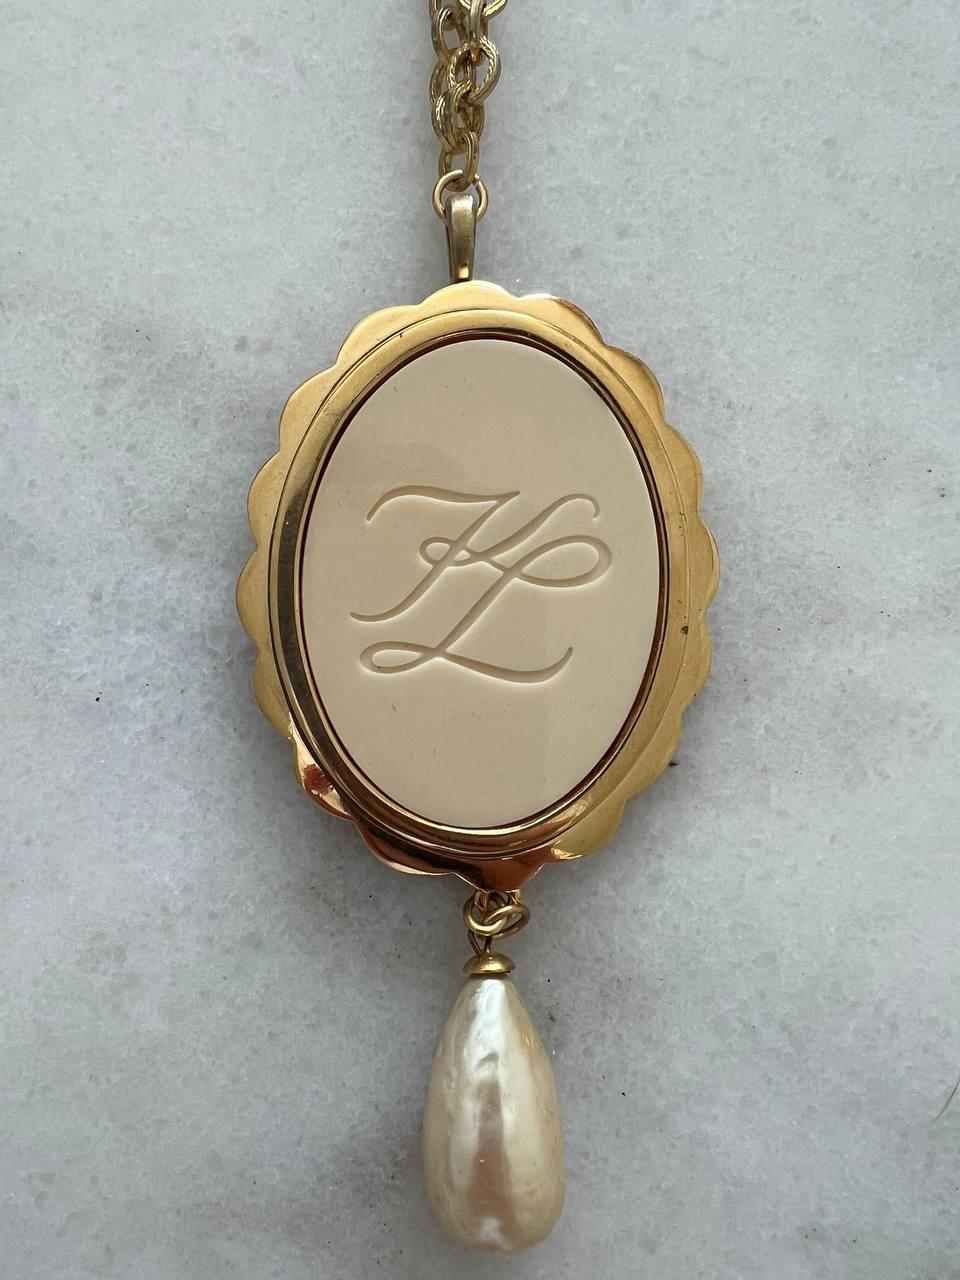 Vintage Karl Lagerfeld Glass and Faux Pearl KL Logo Pendant, 1990s For Sale 2